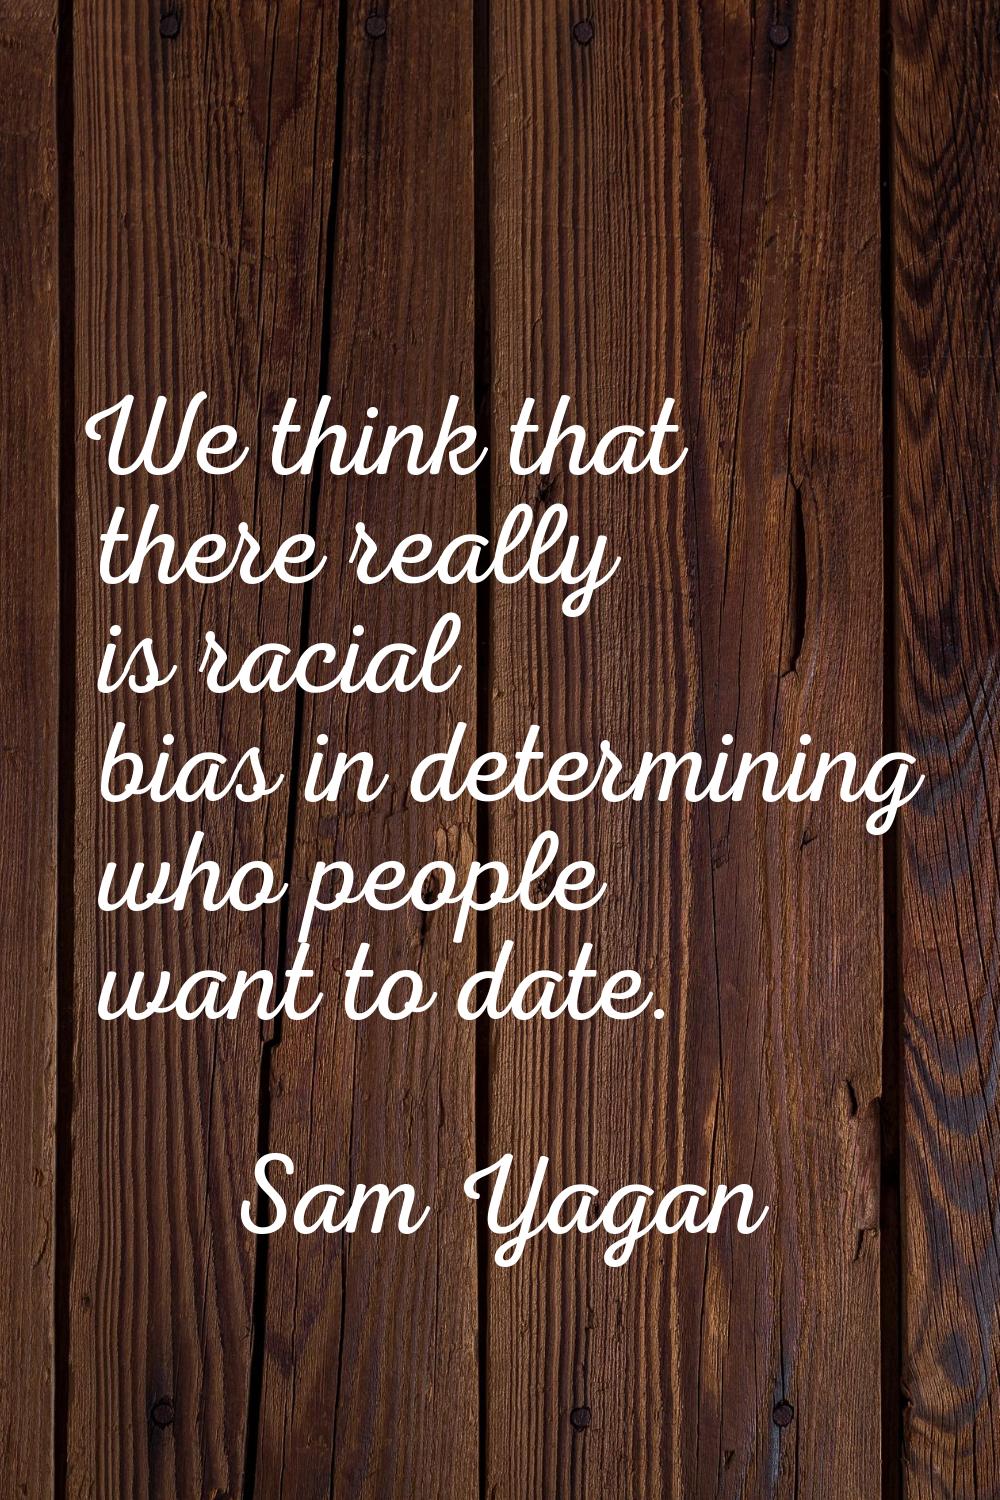 We think that there really is racial bias in determining who people want to date.